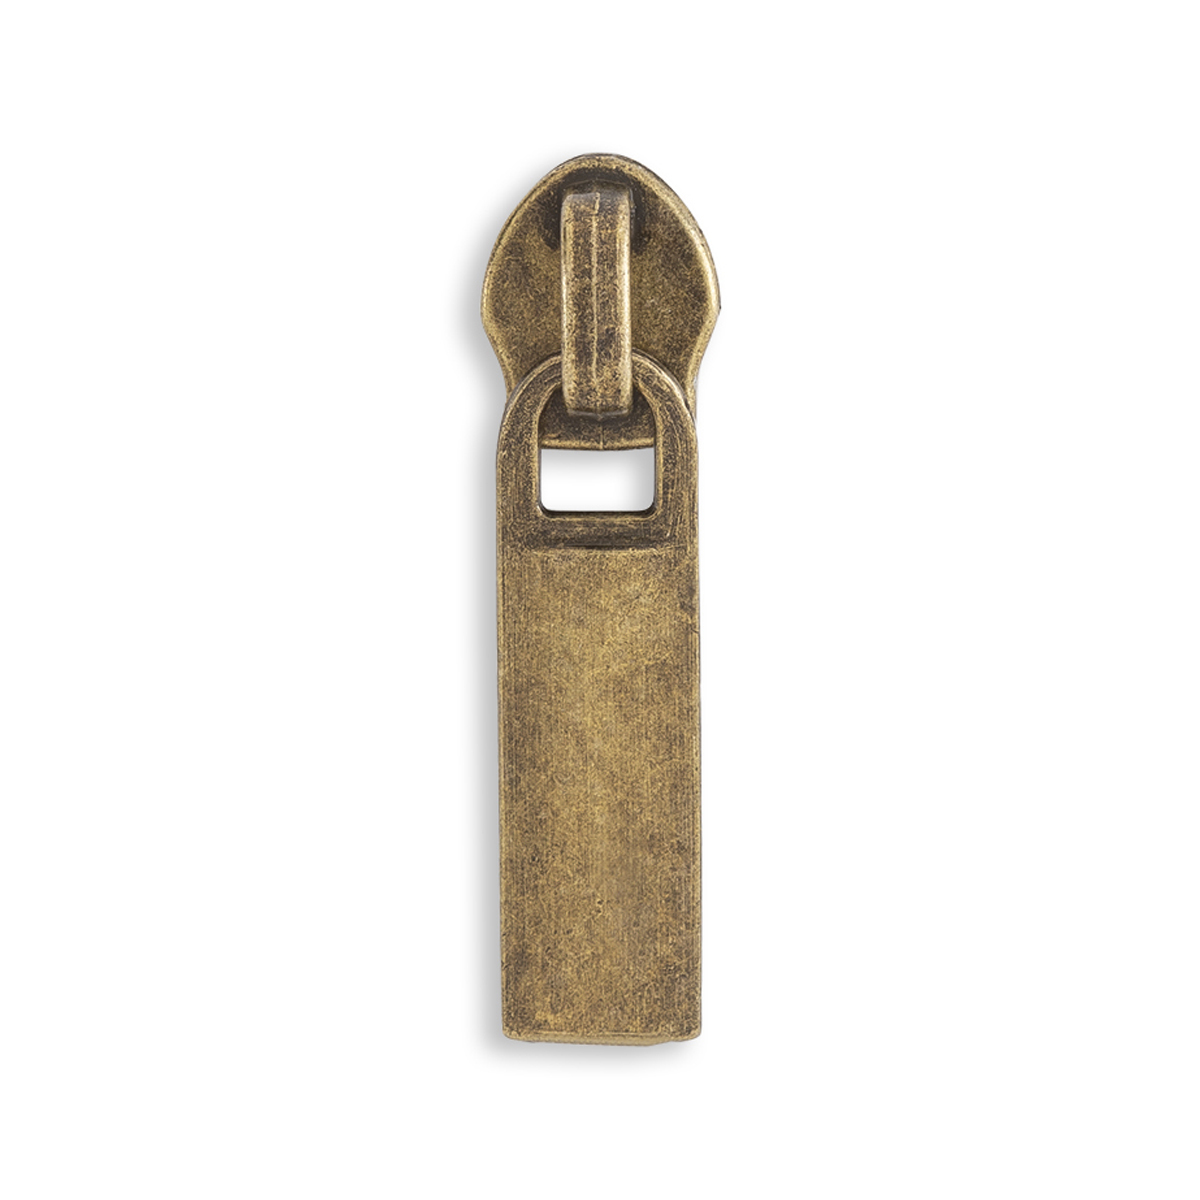 Tumi Replacement Sliders, Zipper Pull Tabs - Antique Brass (Set of